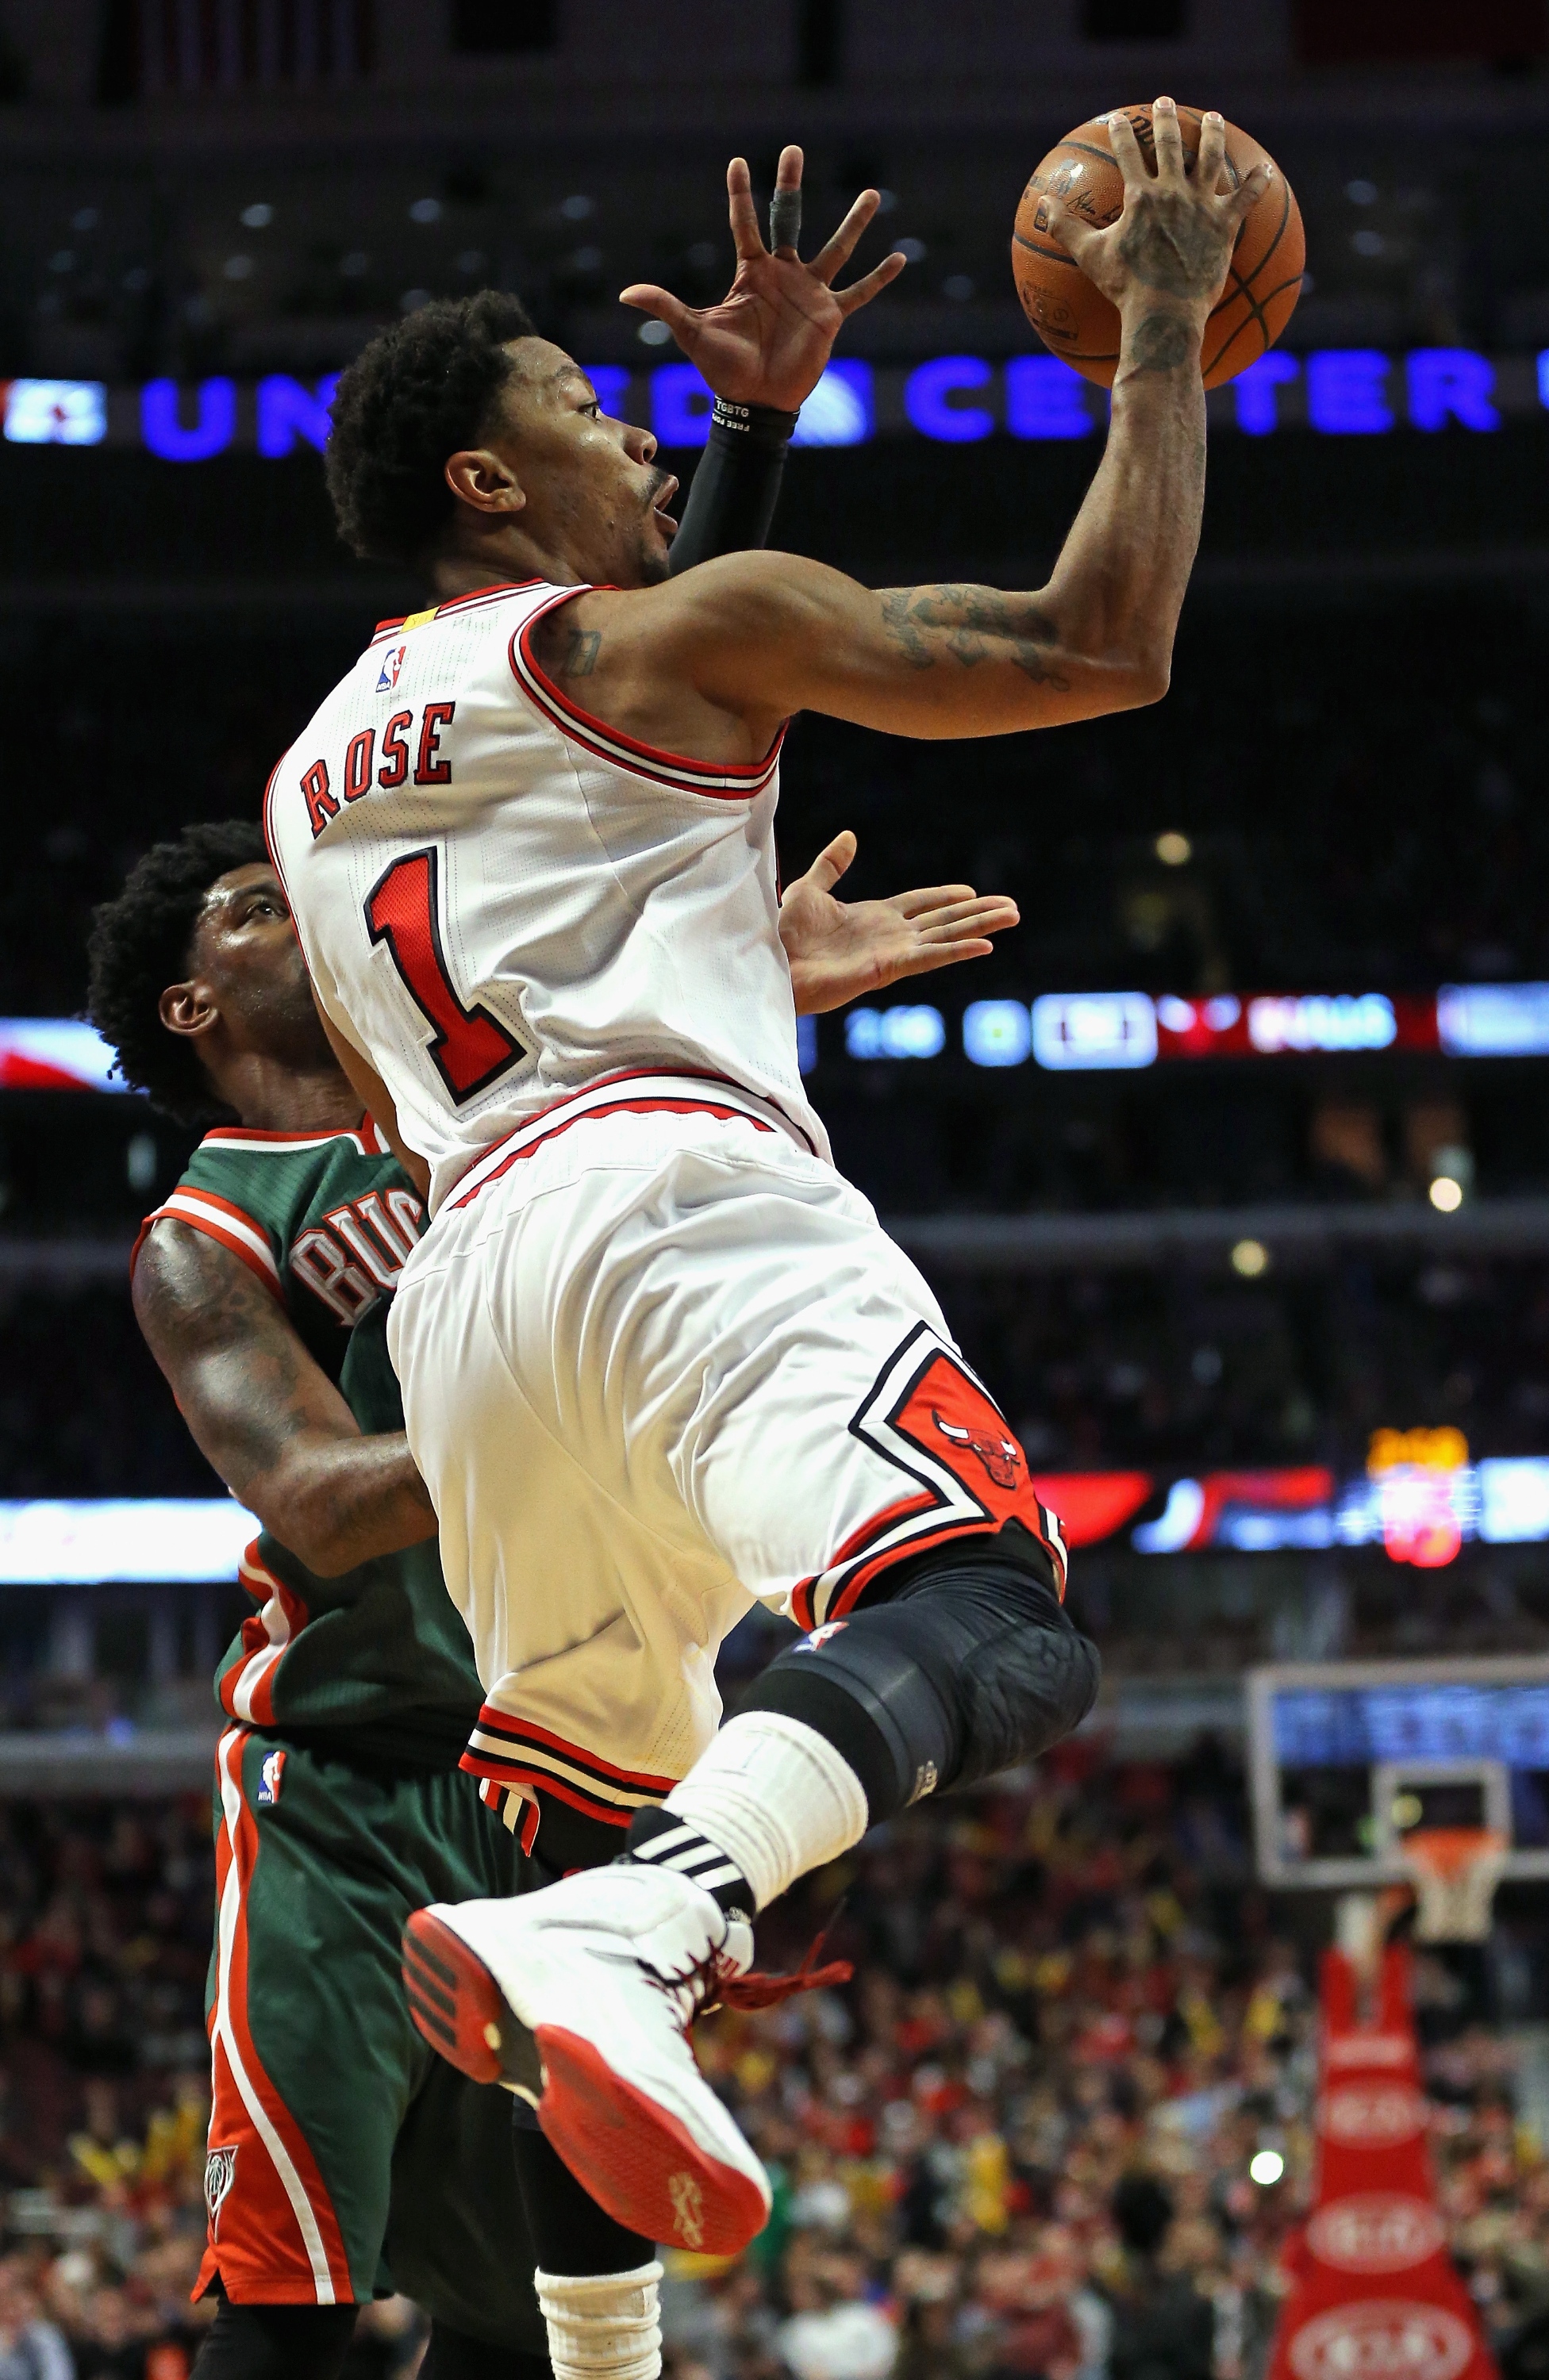 CHICAGO, IL - FEBRUARY 23: Derrick Rose #1 of the Chicago Bulls leaps to pass over O.J. Mayo #00 of the Milwaukee Bucks at the United Center on February 23, 2015 in Chicago, Illinois. The Bulls defeated the Bucks 87-71. NOTE TO USER: User expressly acknowledges and agrees that, by downloading and or using this photograph, User is consenting to the terms and conditions of the Getty Images License Agreement. (Photo by Jonathan Daniel/Getty Images)